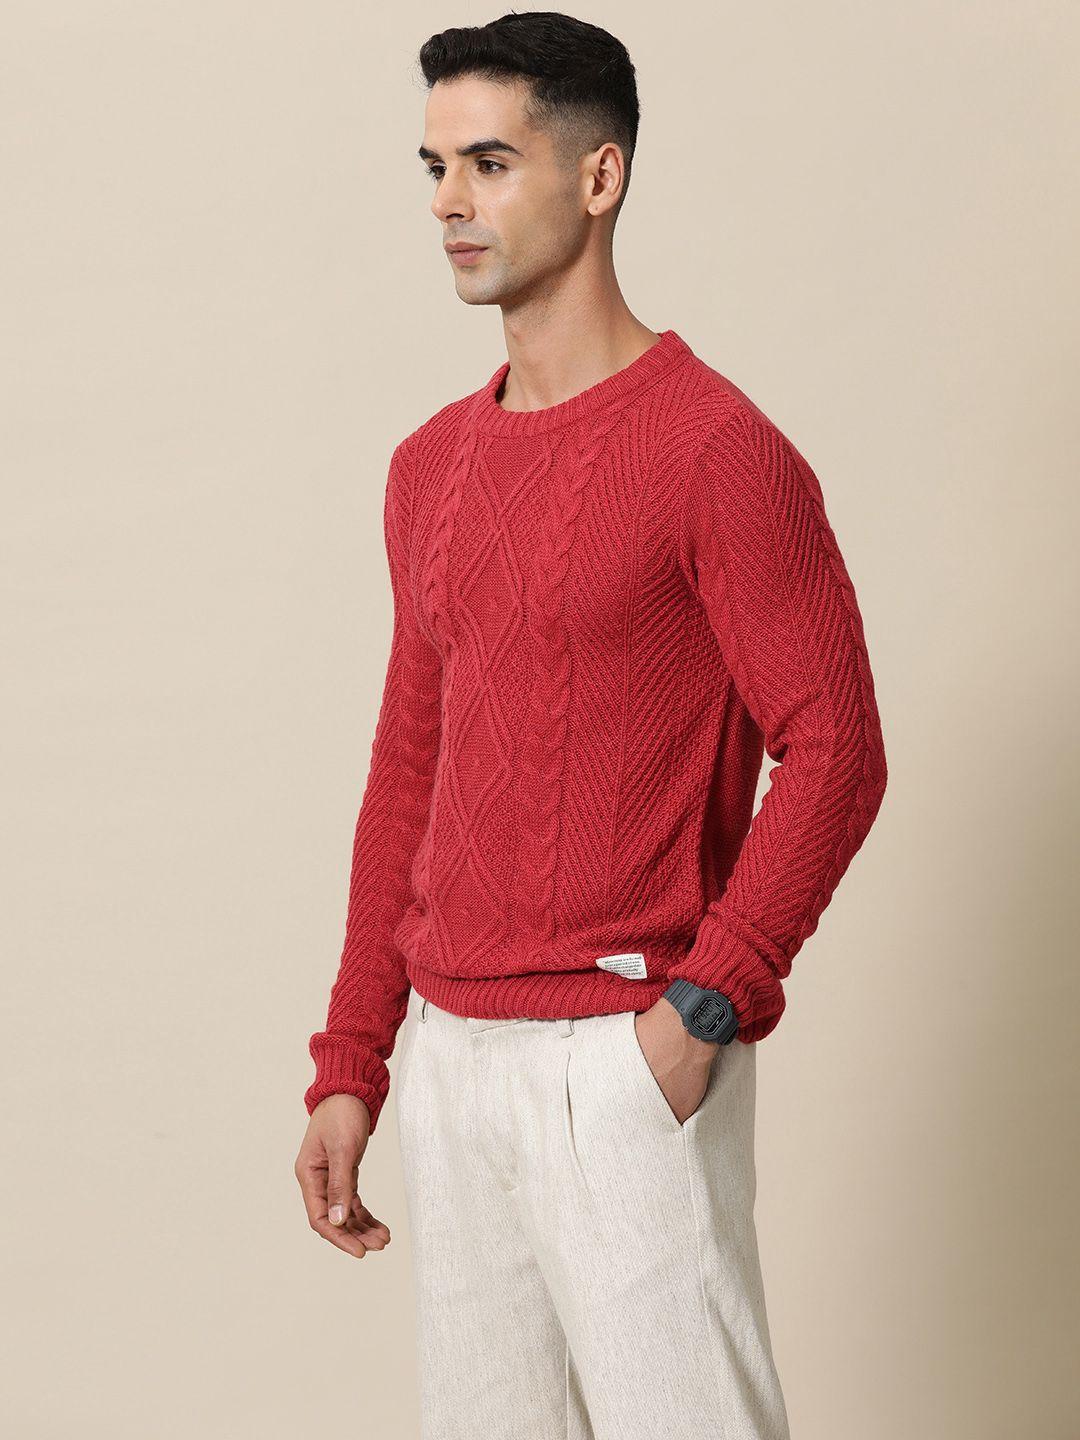 mr bowerbird men solid cable ribbed tailored fit pullover